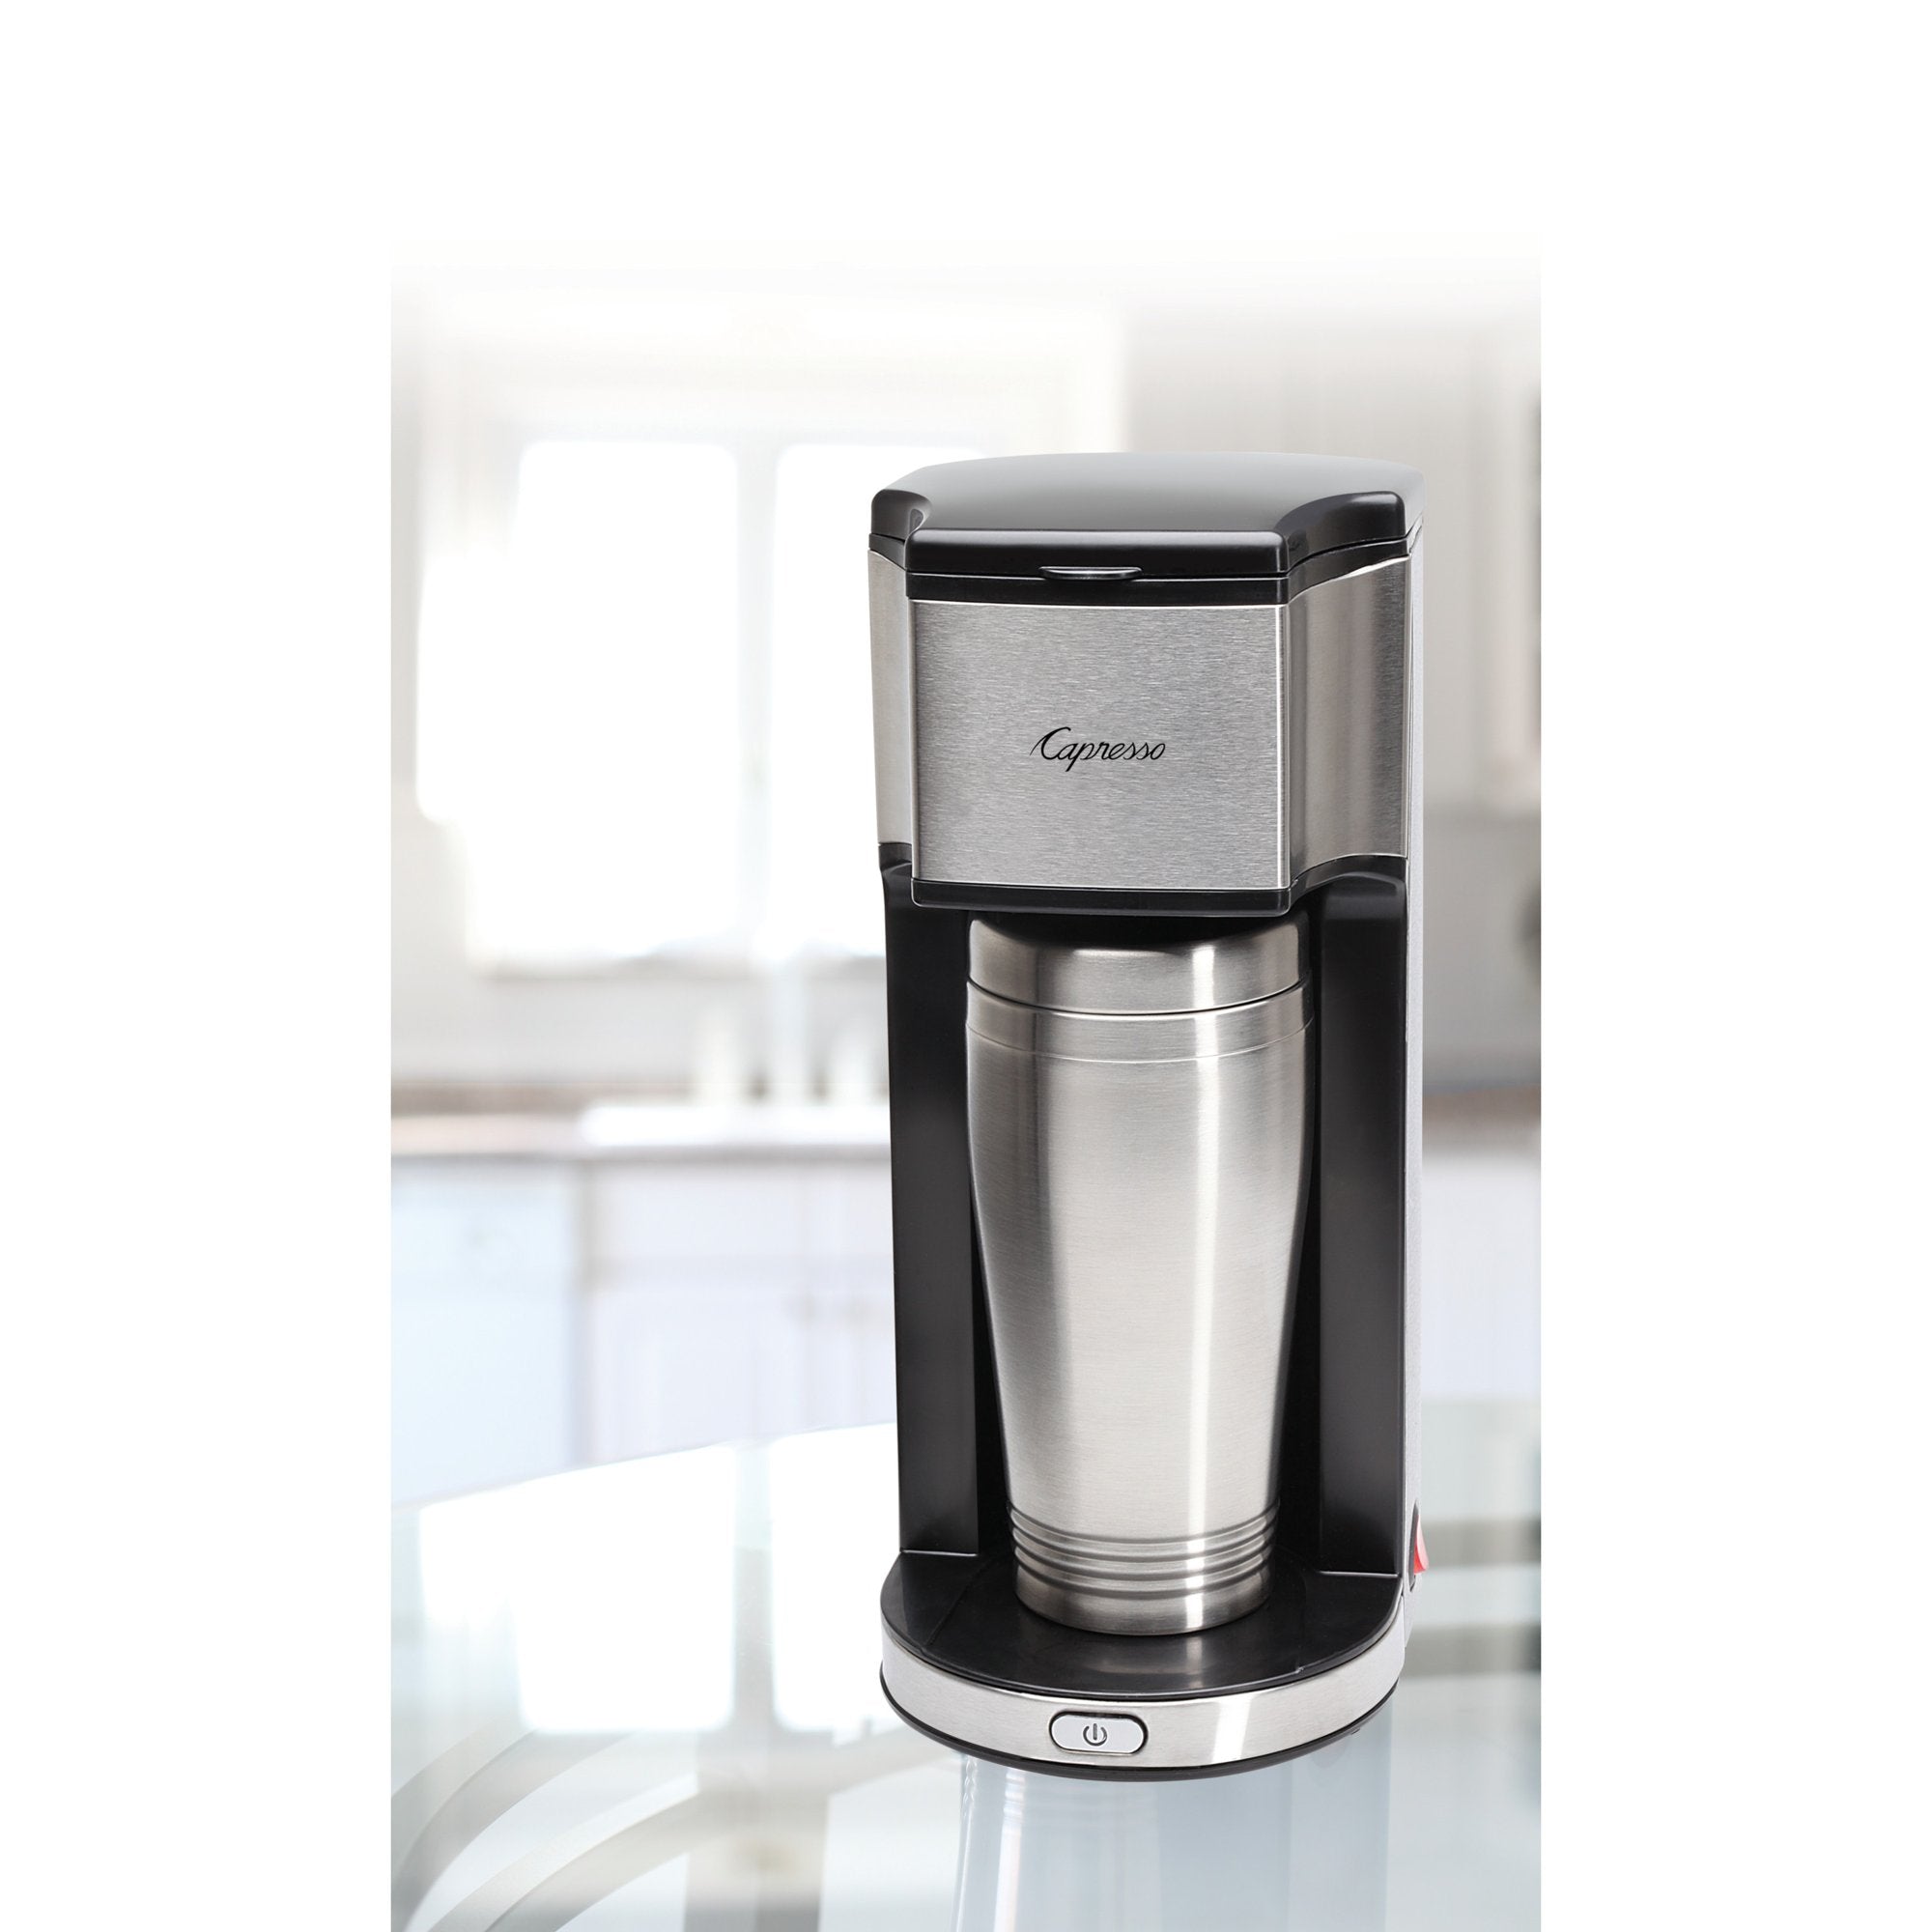 Capresso ONTHEGO-RB 425 Personal Coffee Maker, Silver/Black - Certified Refurbished